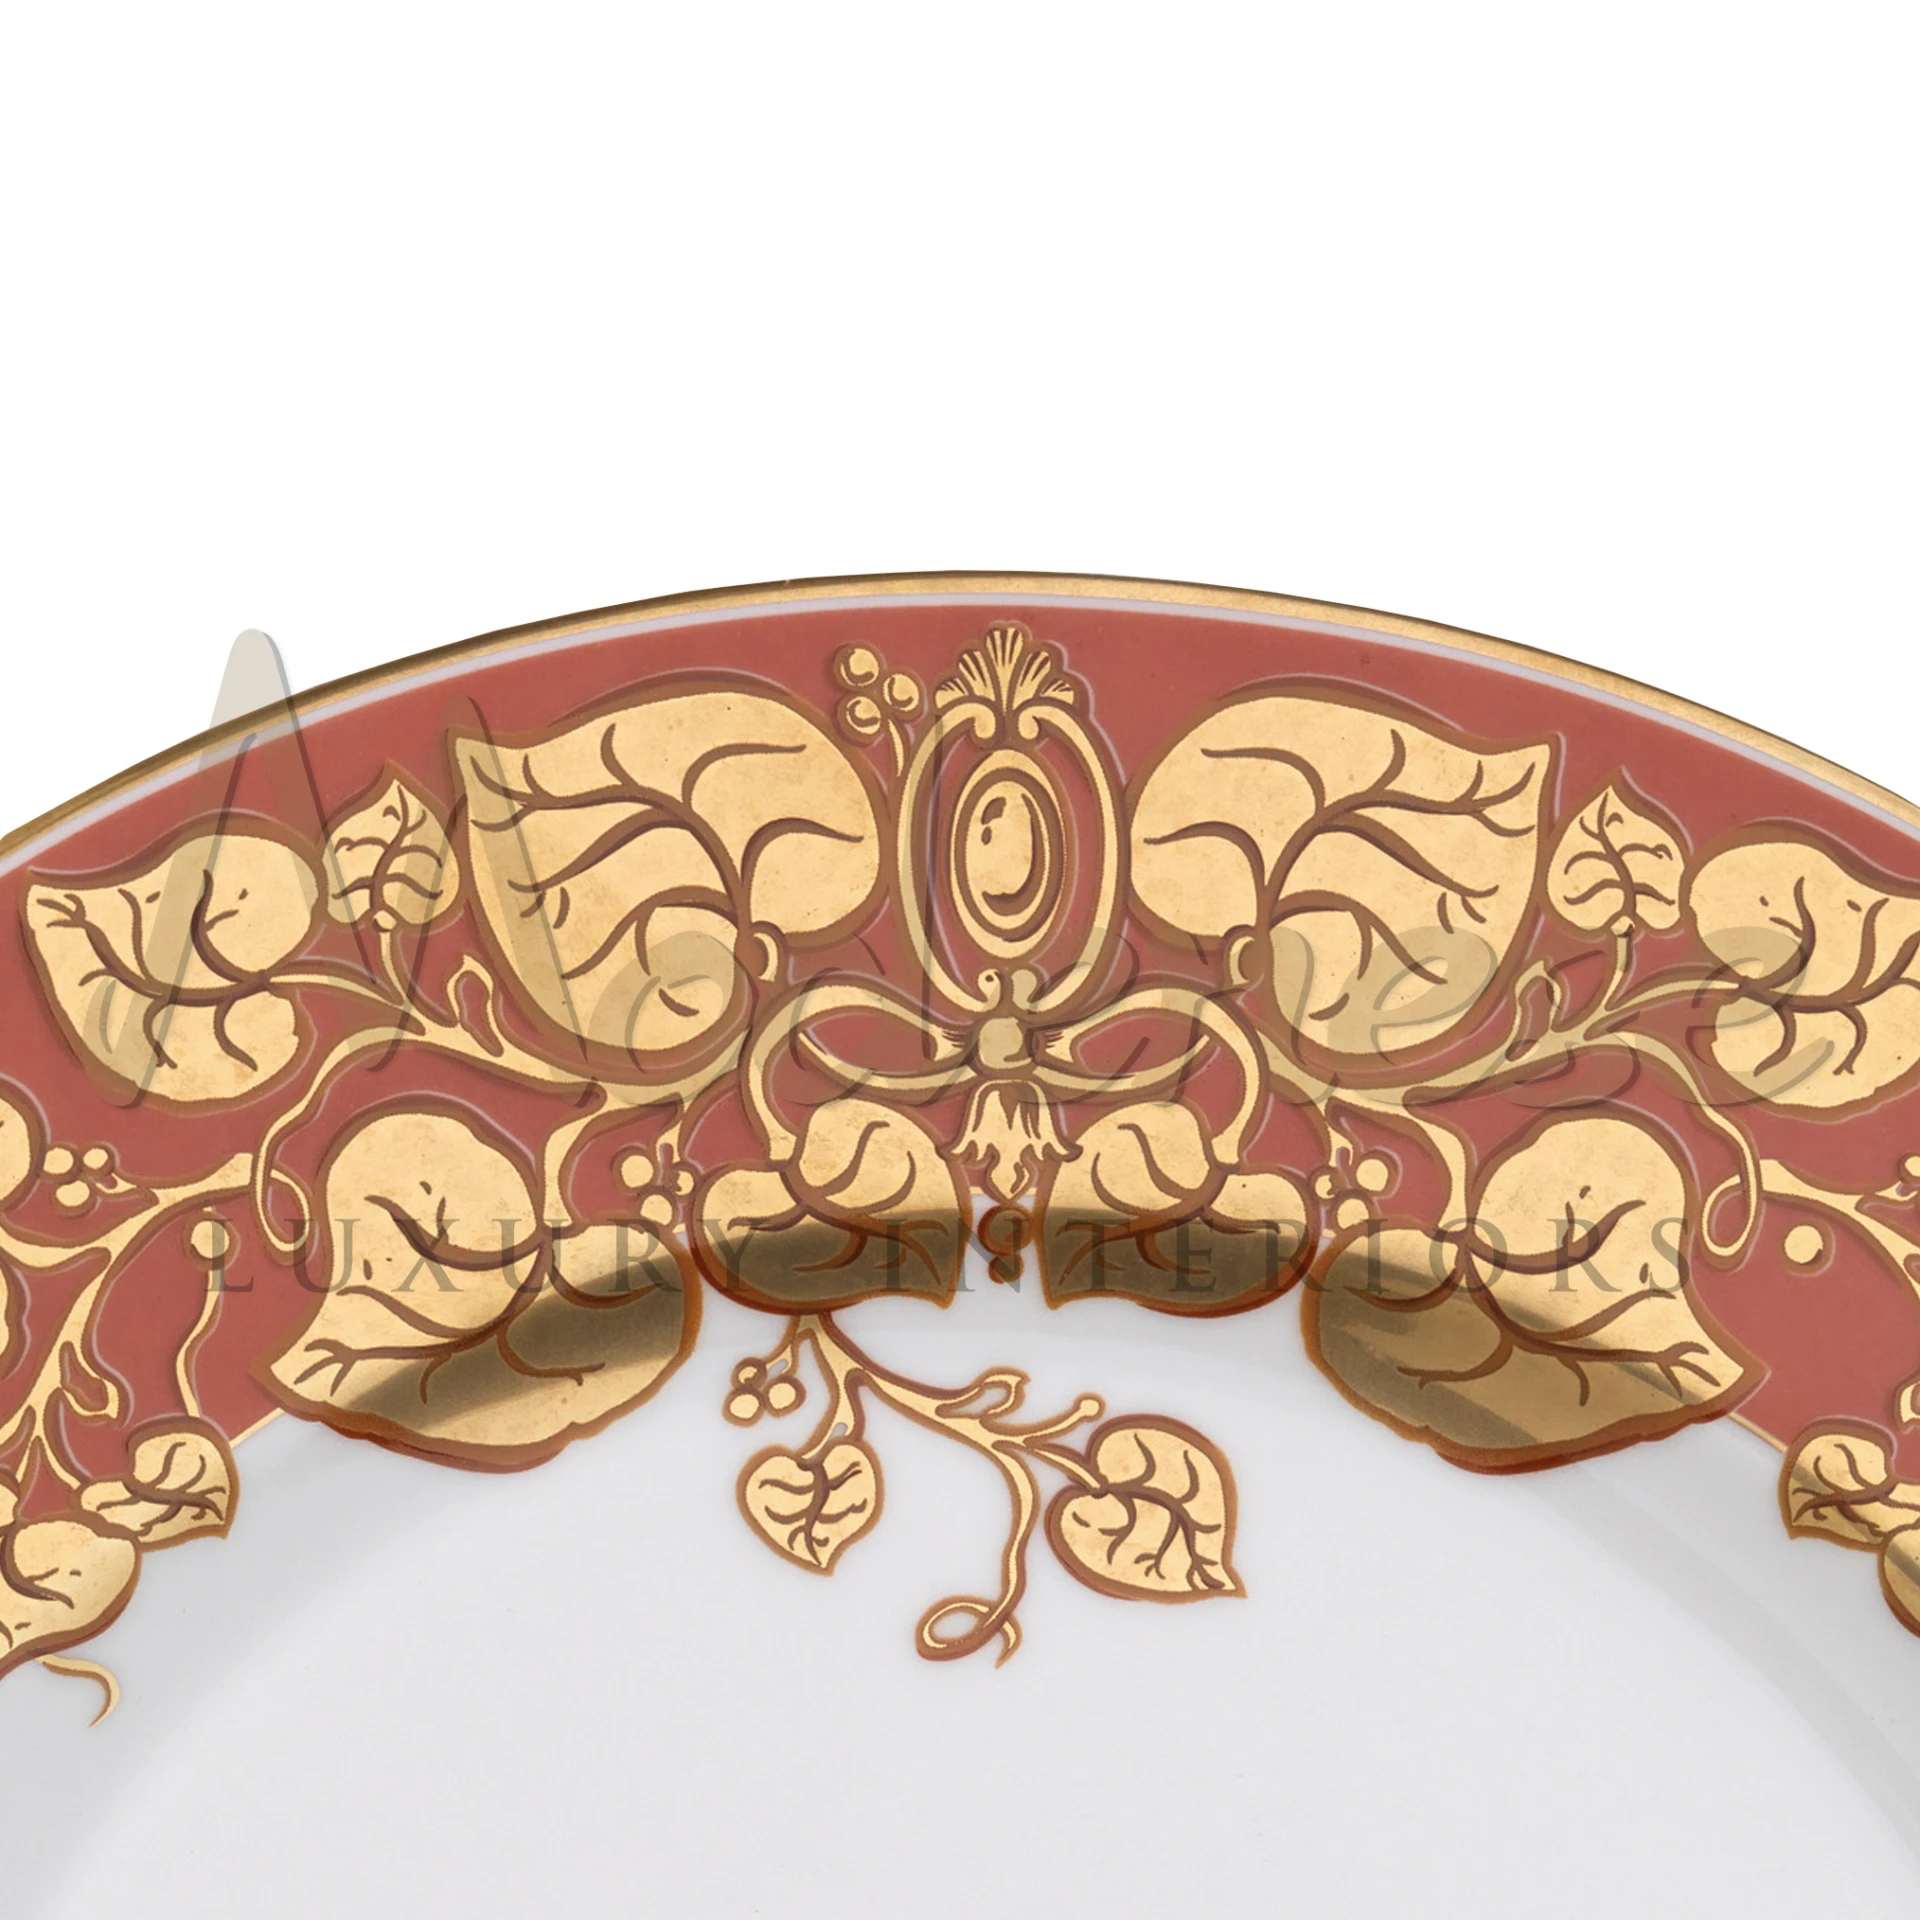 A detailed, ornate golden design on a red background, resembling a symmetrical pattern with floral and leaf motifs.